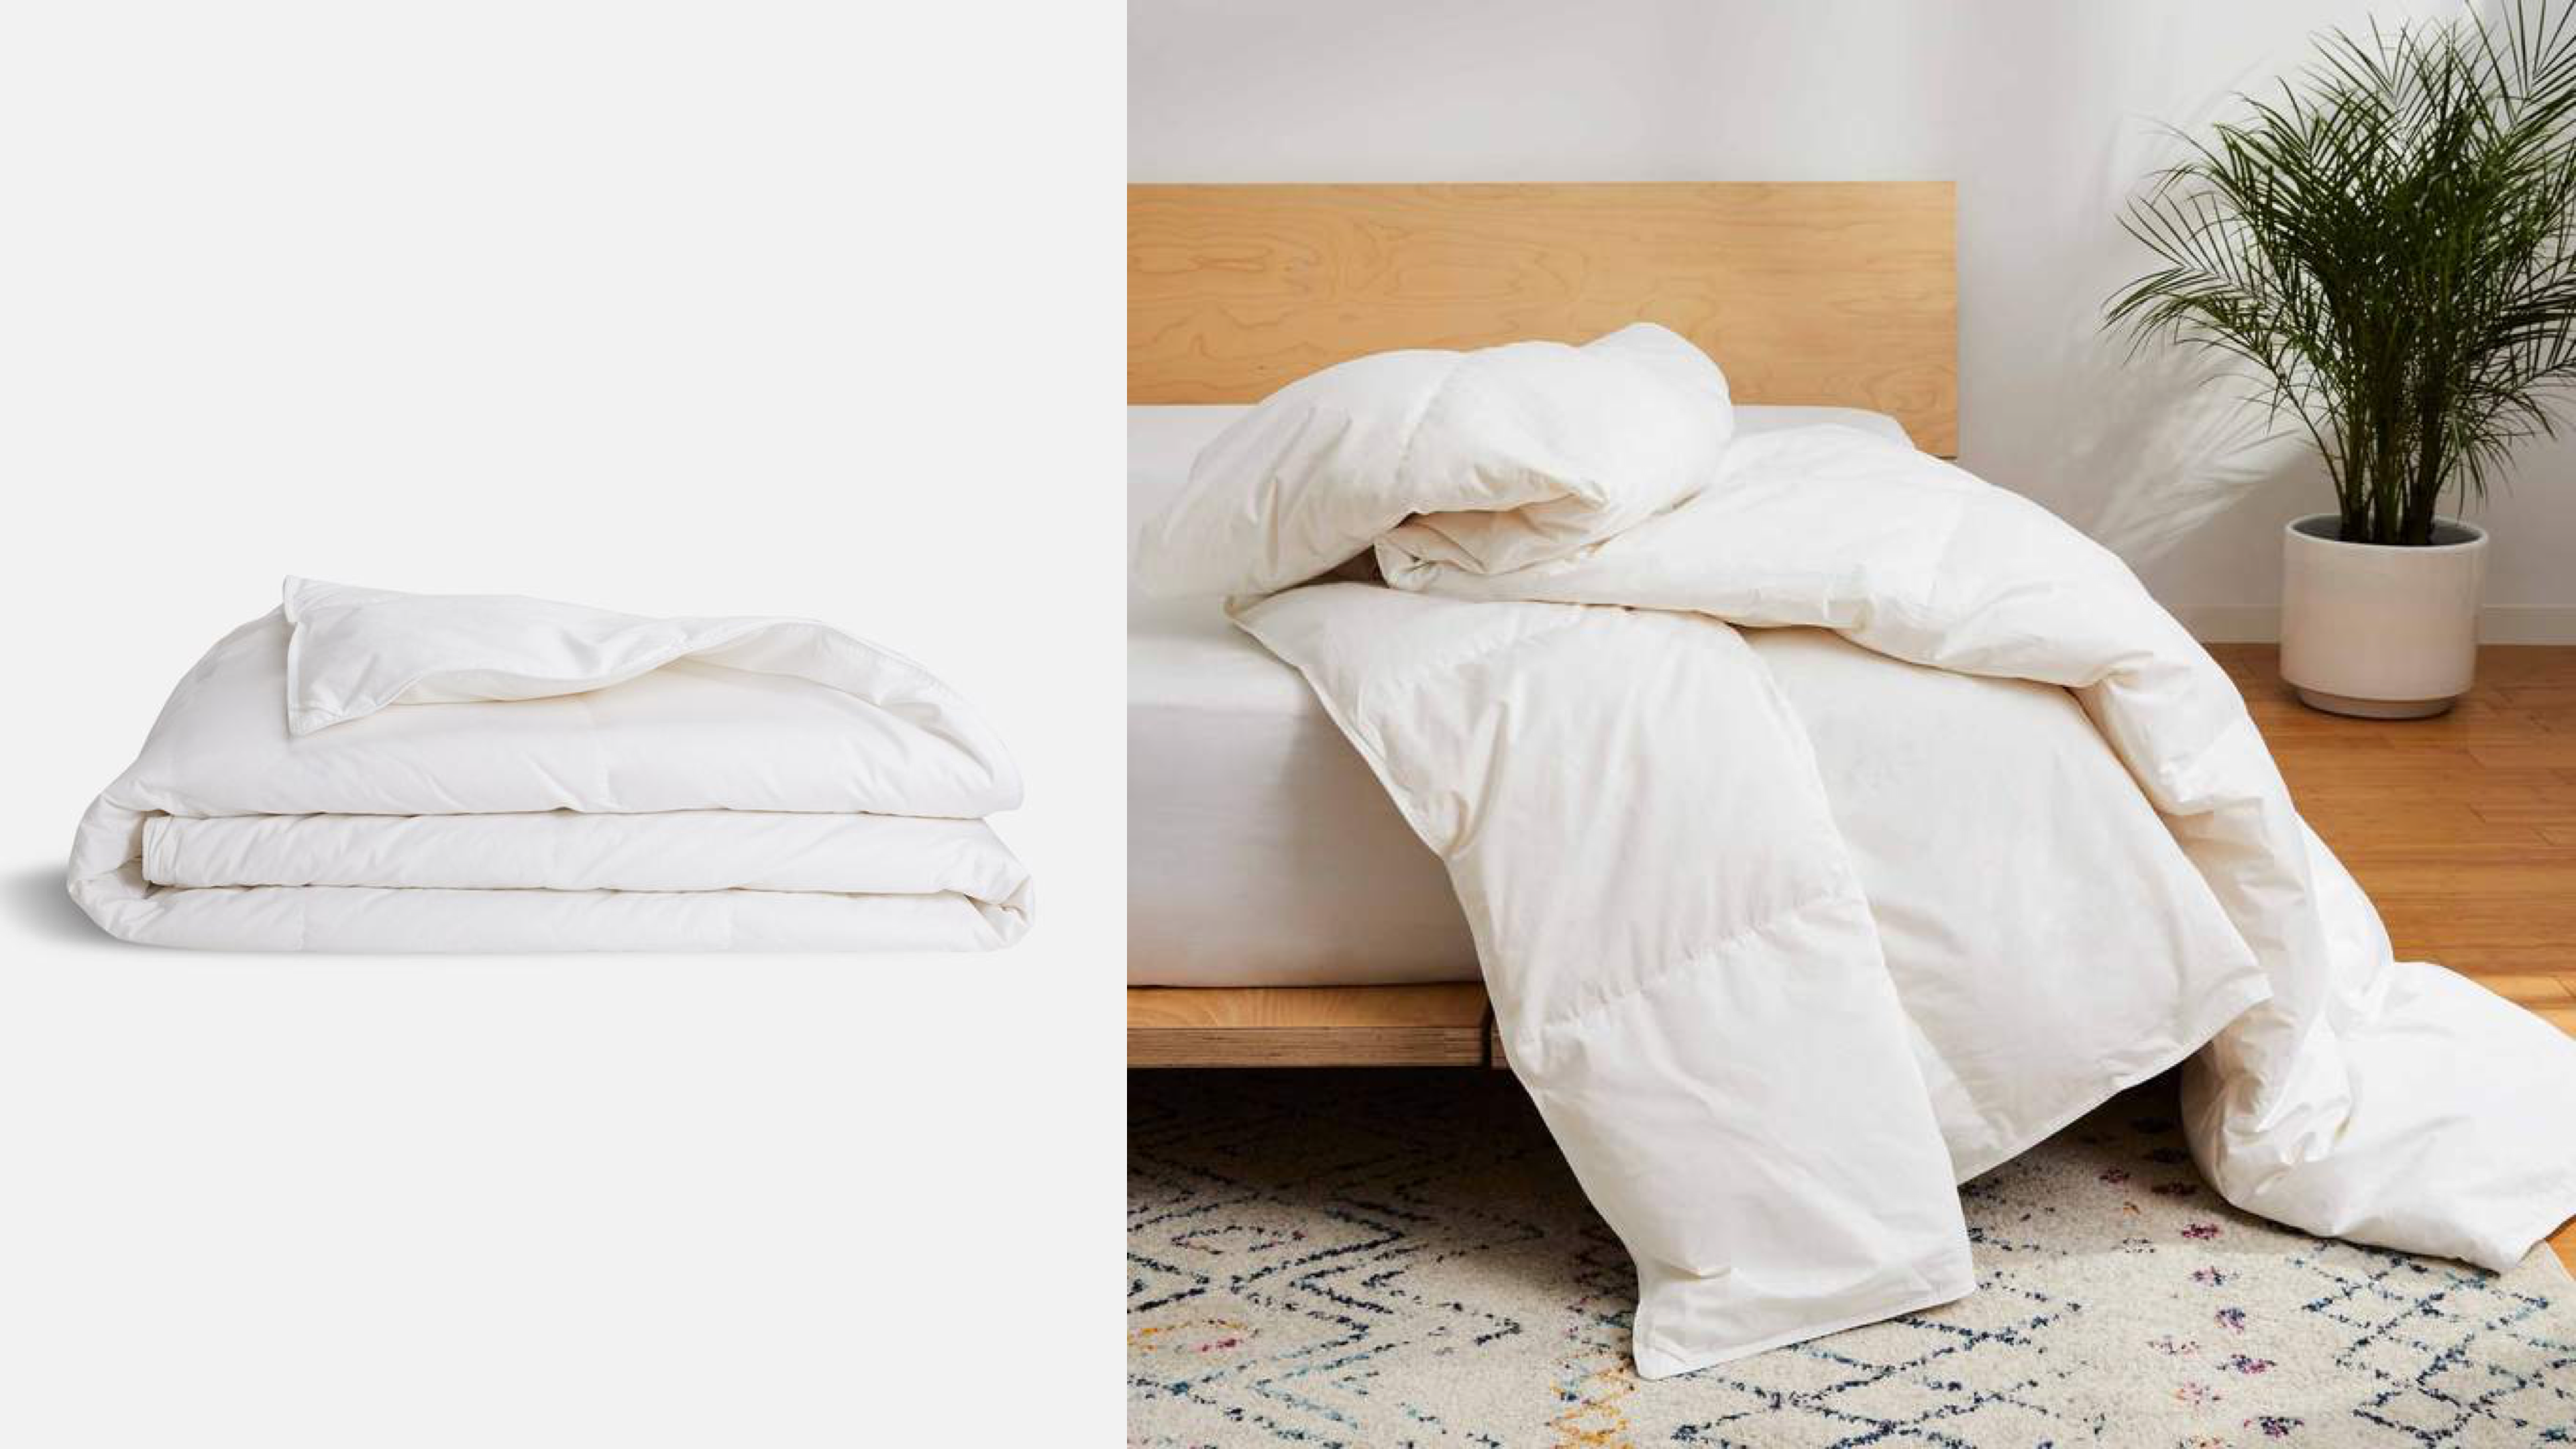 Kitelinens Bed Sheets  Stay-Tucked Cotton Sheets